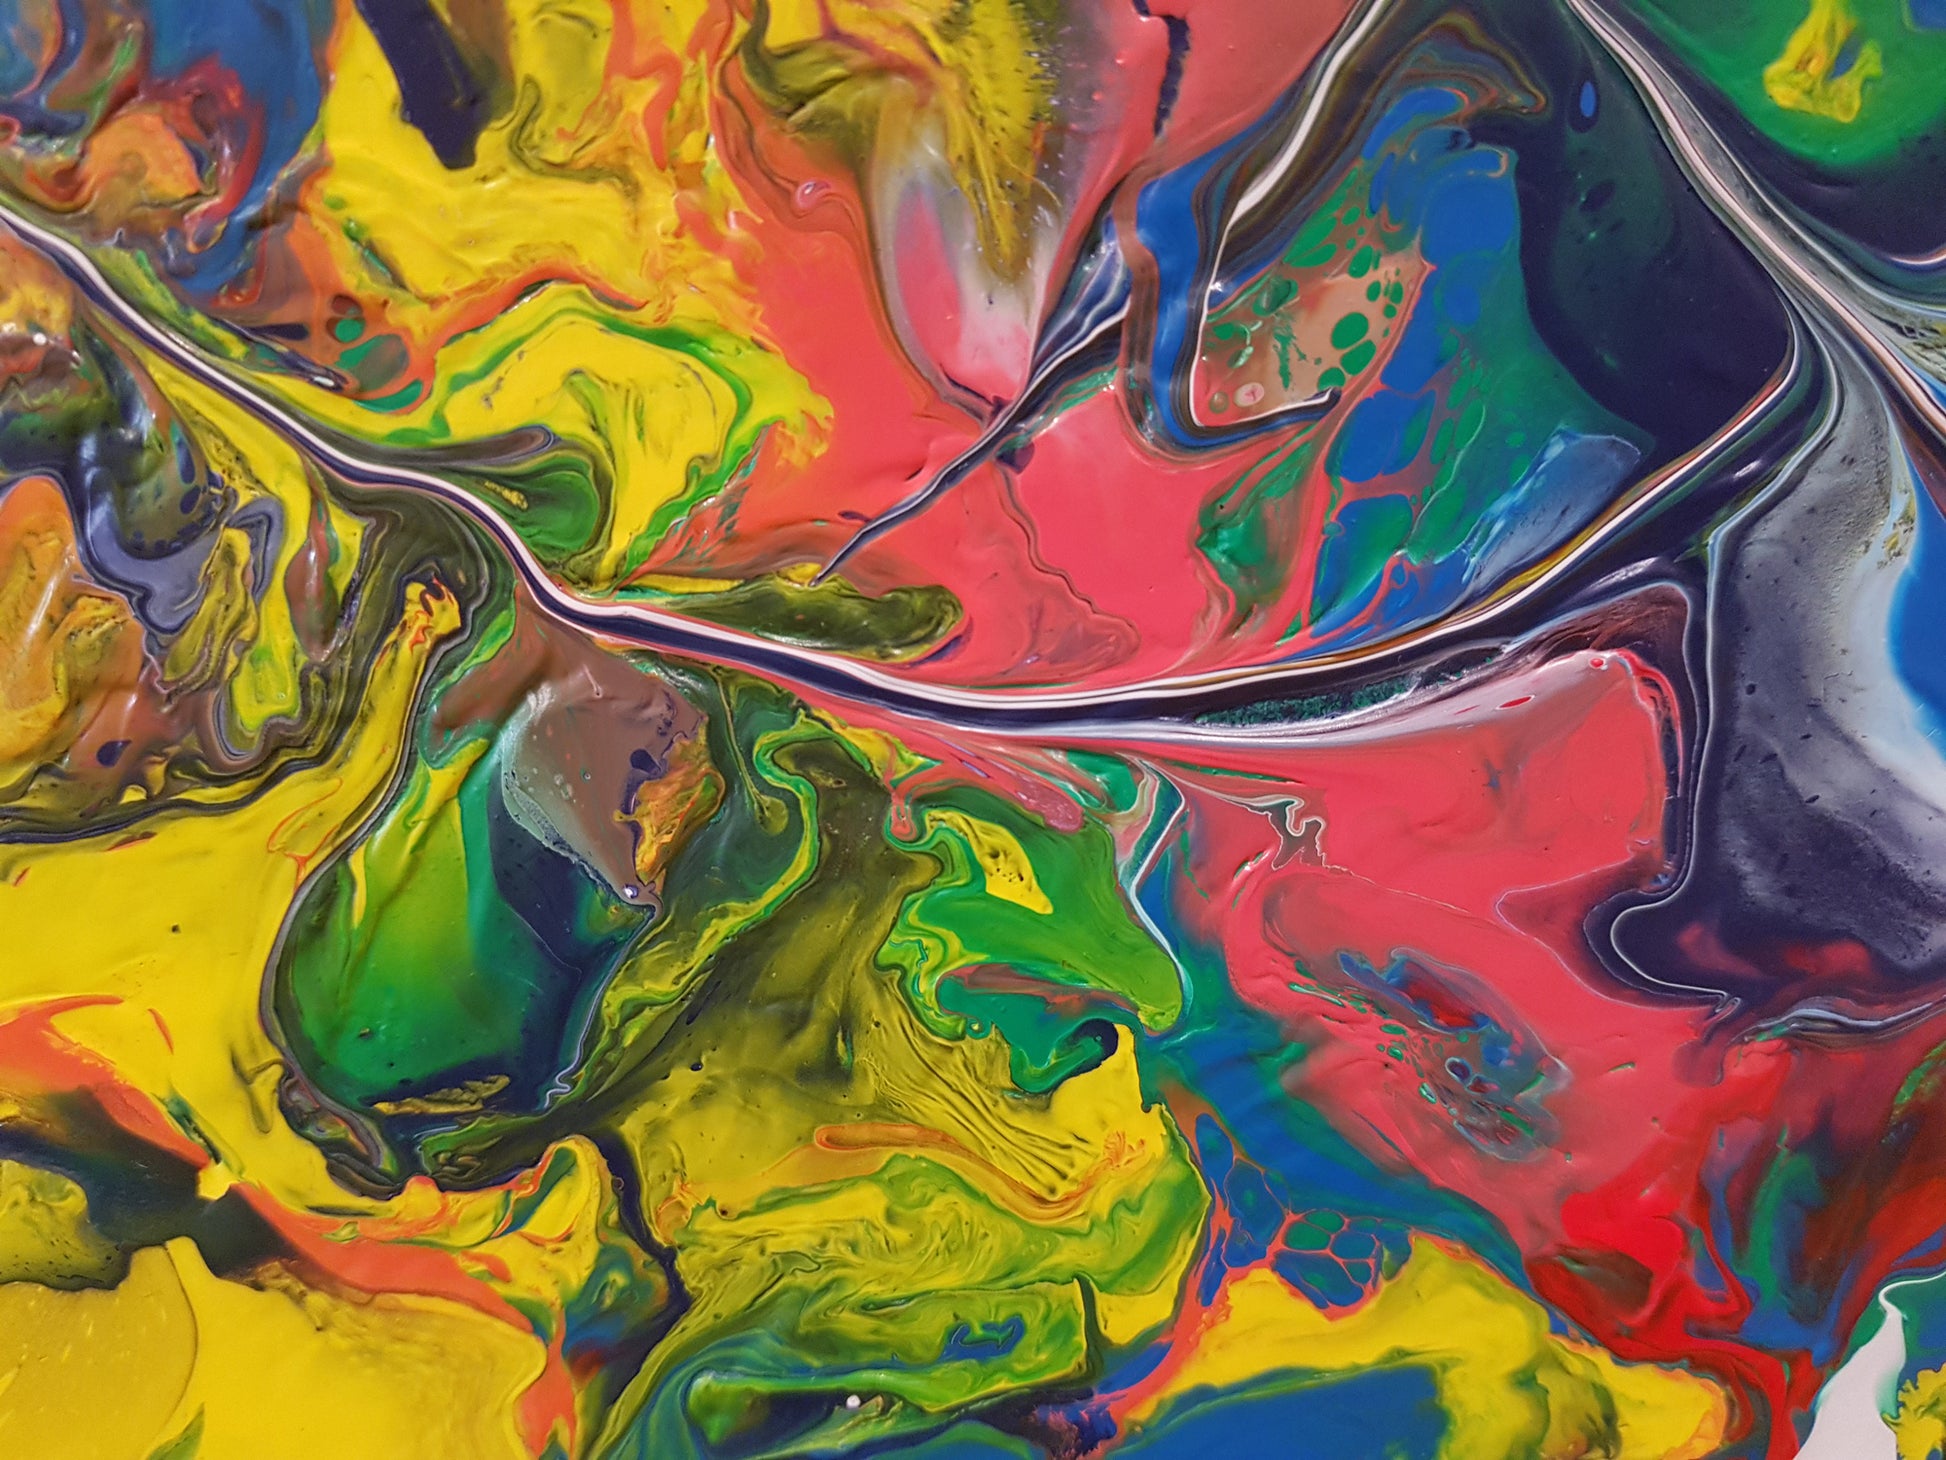 Heart-of-a-Rainbow-by-Alexandra-Romano-Original-Extra-Large-Abstract-Paintings-for-Sale-Online-Art-Gallery-Colorful-Acrylic-on-Canvas-Artwork-Shopping-Toronto-Canada